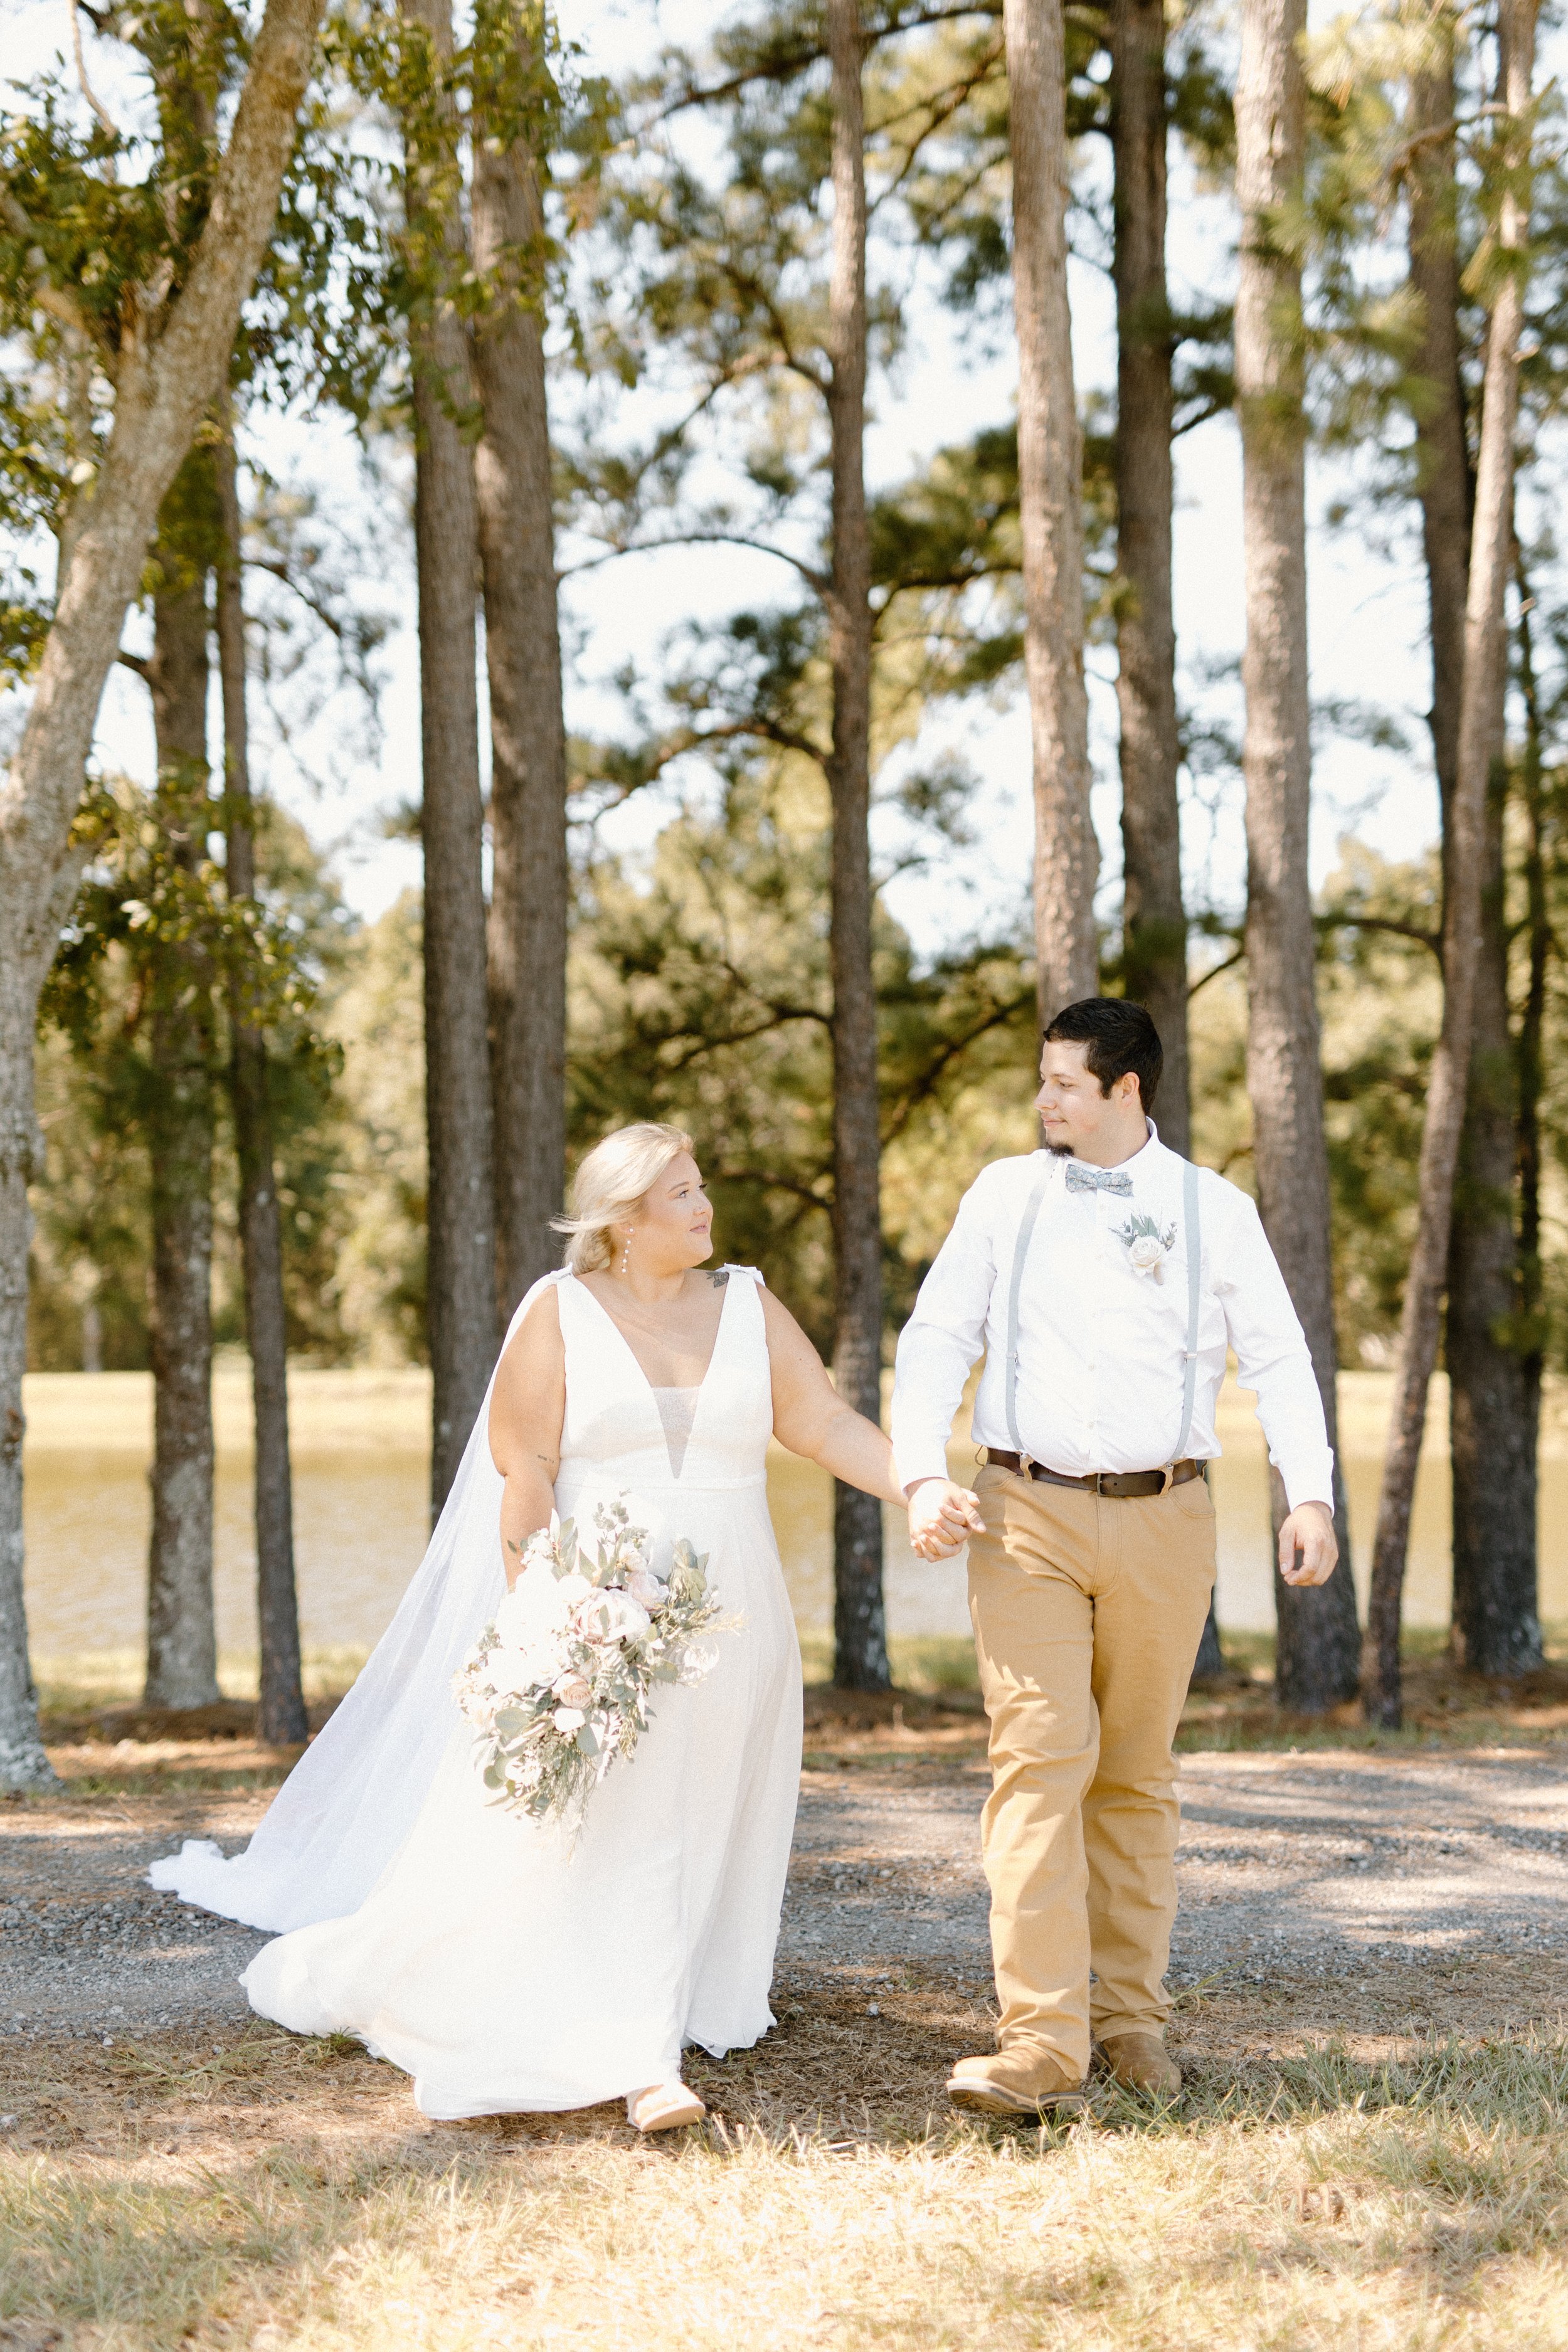 ivory-and-beau-blog-down-for-the-gown-ashley-real-bride-made-with-love-bridal-wedding-dress-bridal-gown-wedding-gown-southern-bride-savannah-bridal-shop-ivory-and-beau-bride-savannah-georgia-MY5A6862.jpg